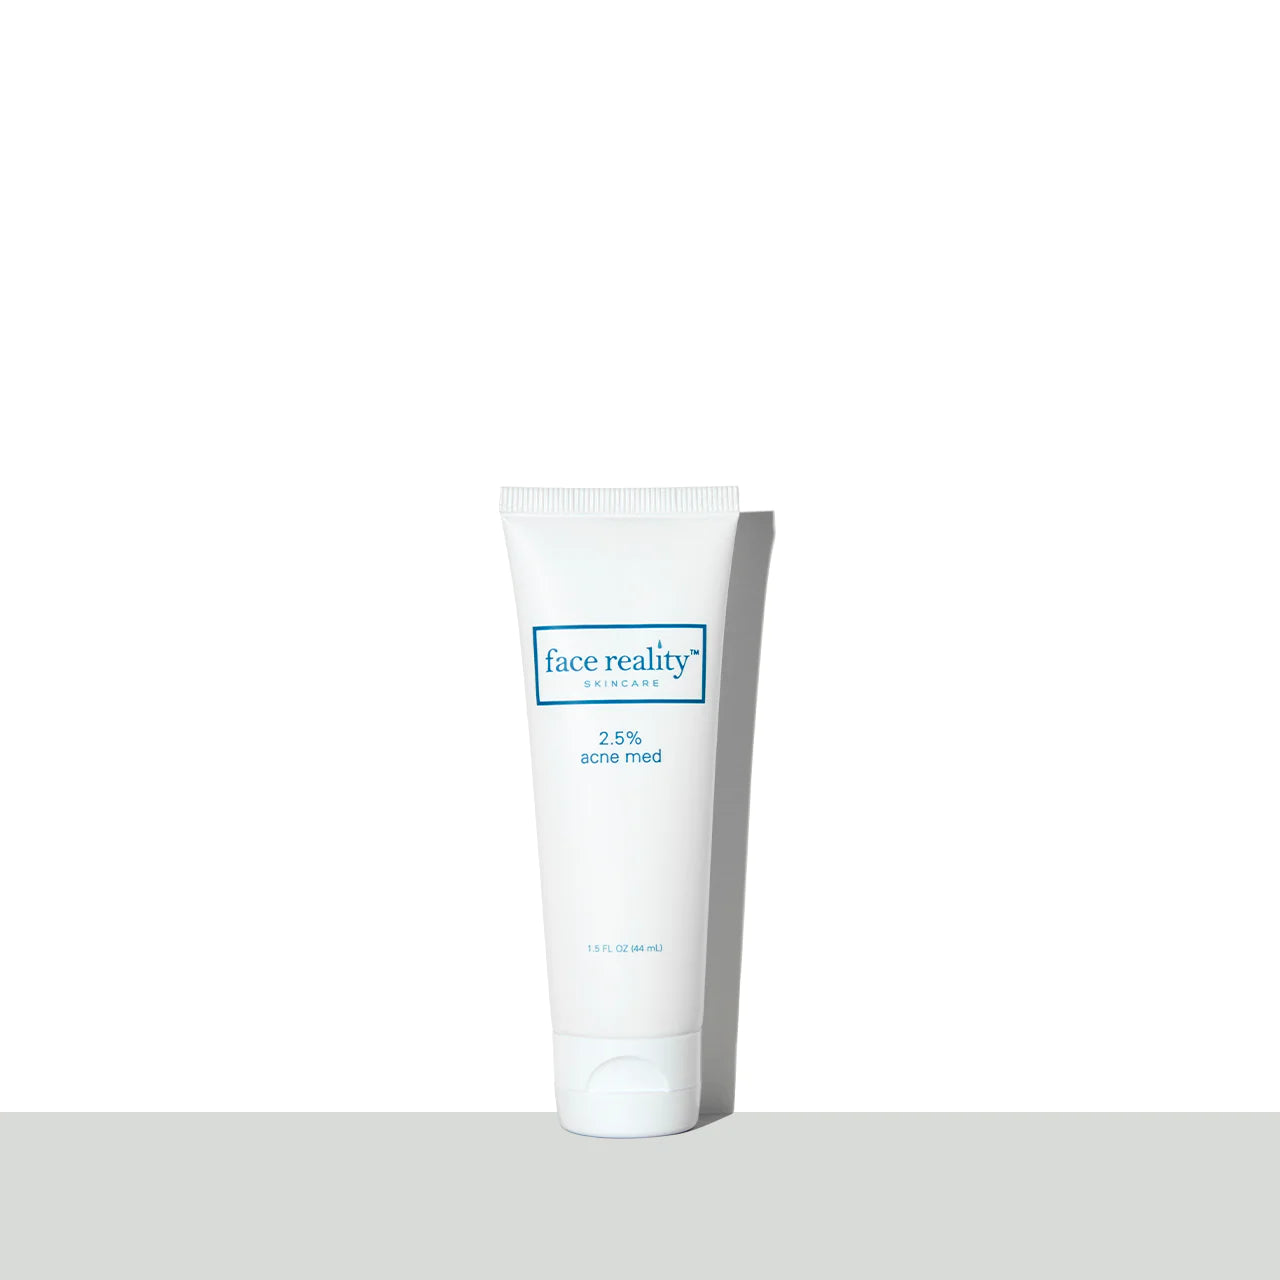 Face Reality - Acne Med 2.5%